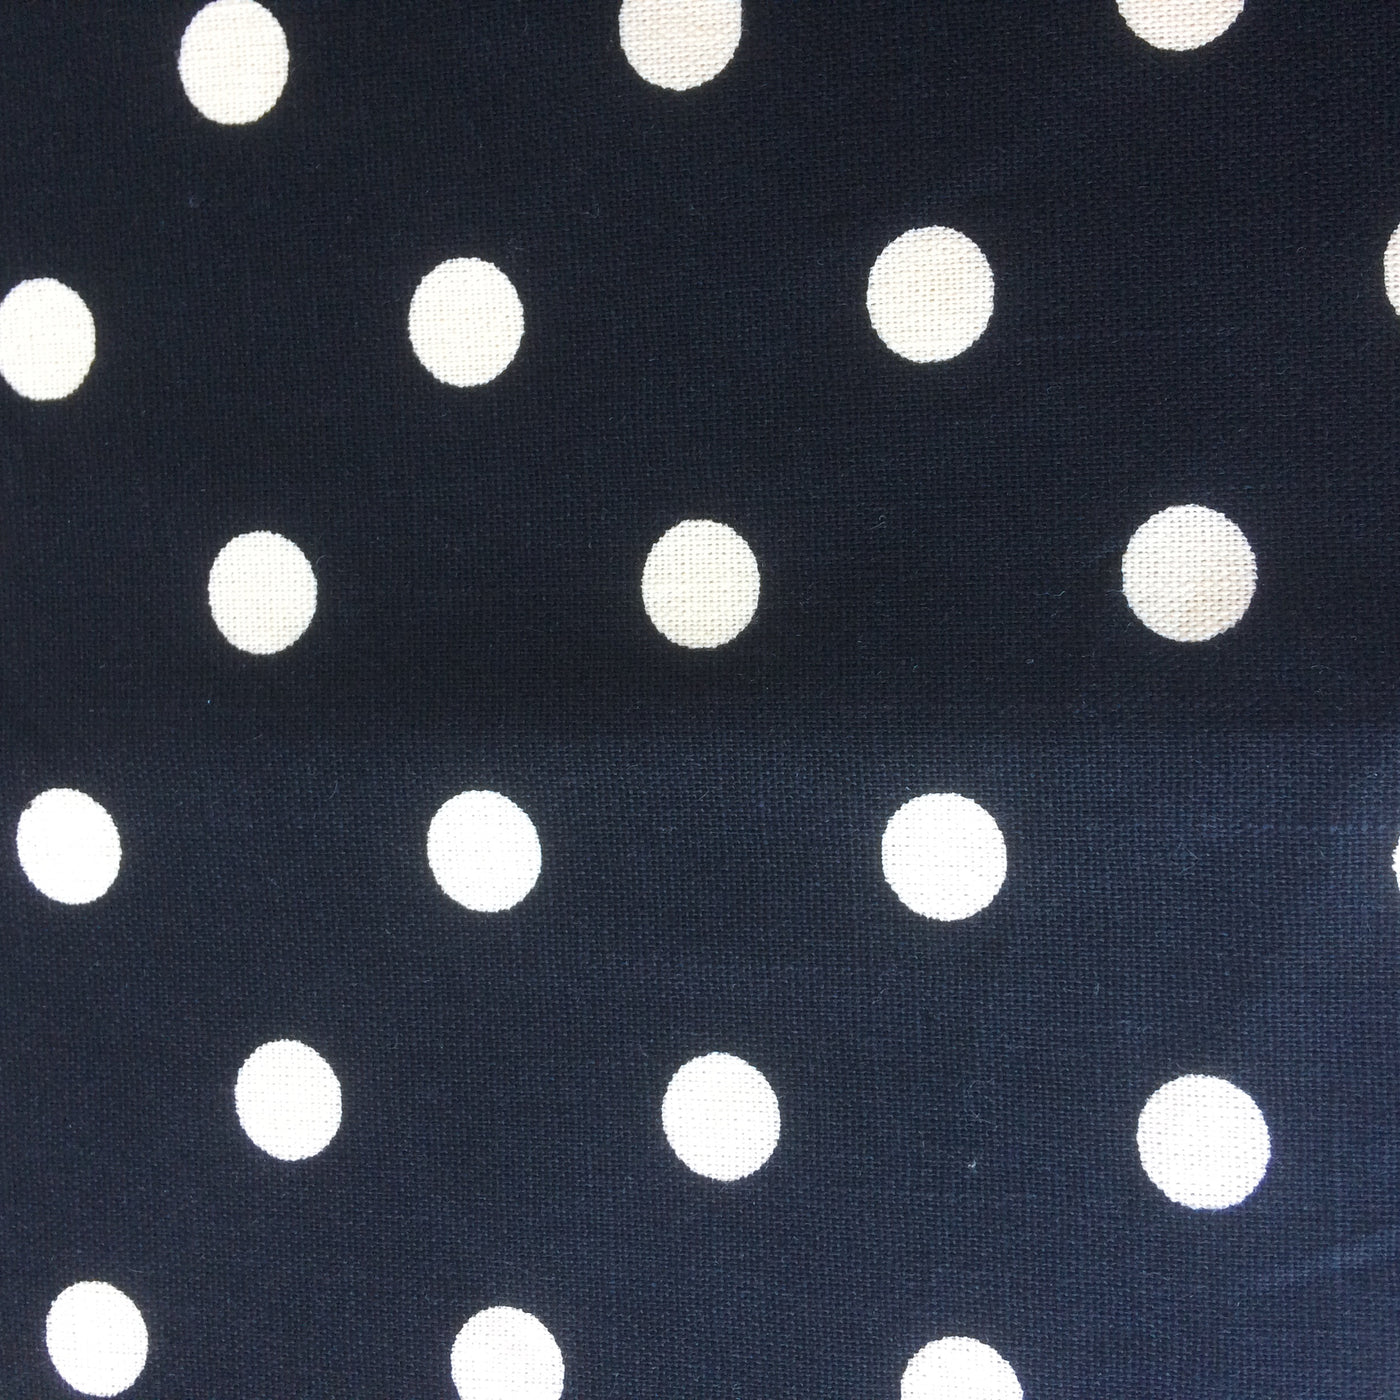 black canvas fabric with large spots